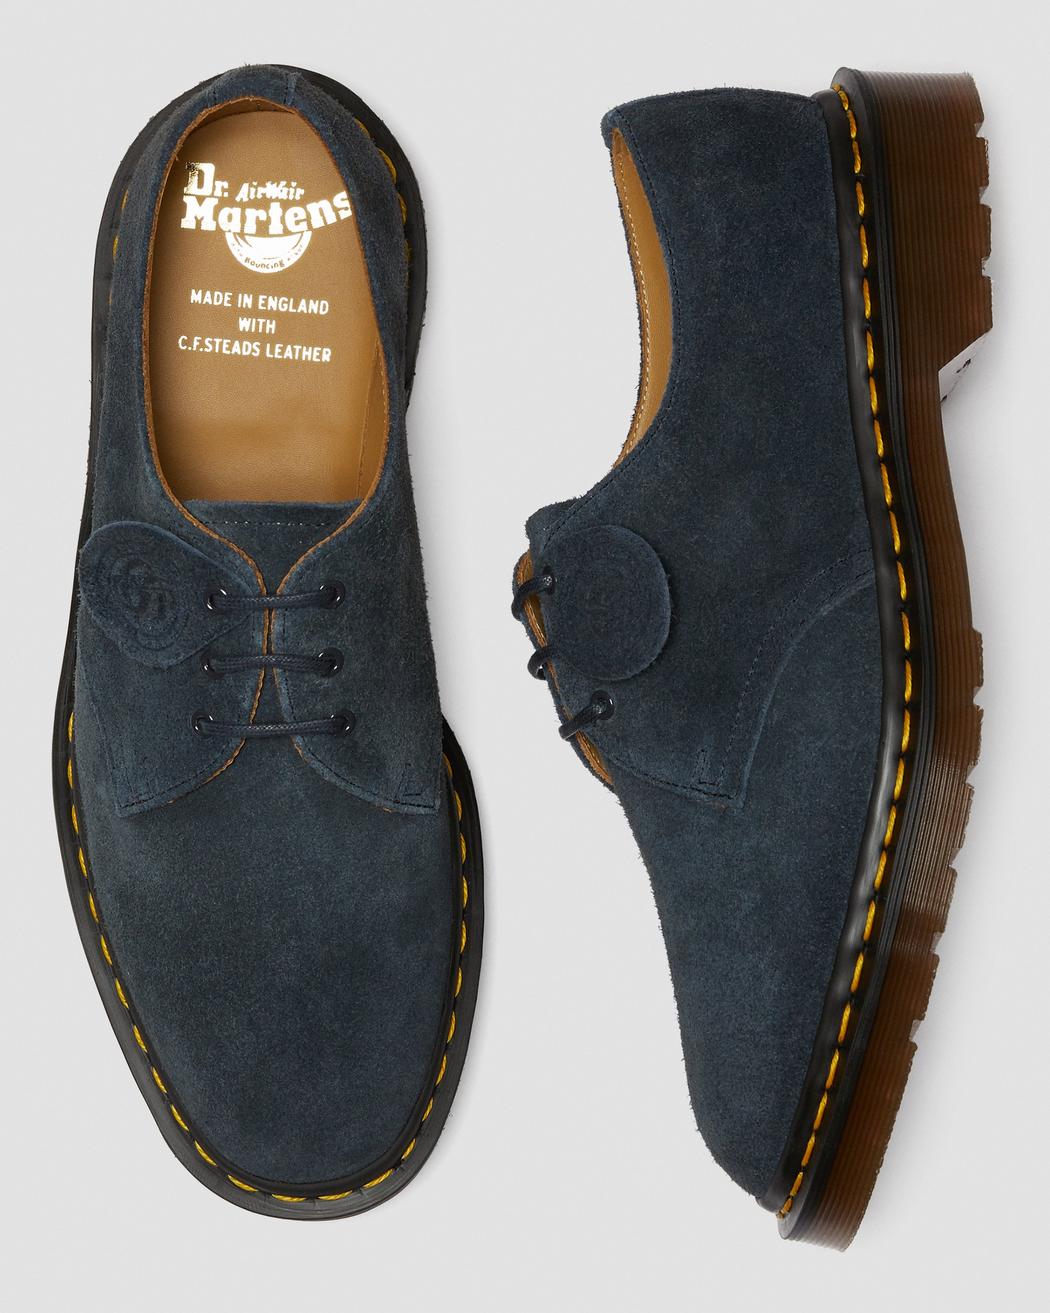 1461 Made In England Suede Oxford Shoes | Dr. Martens